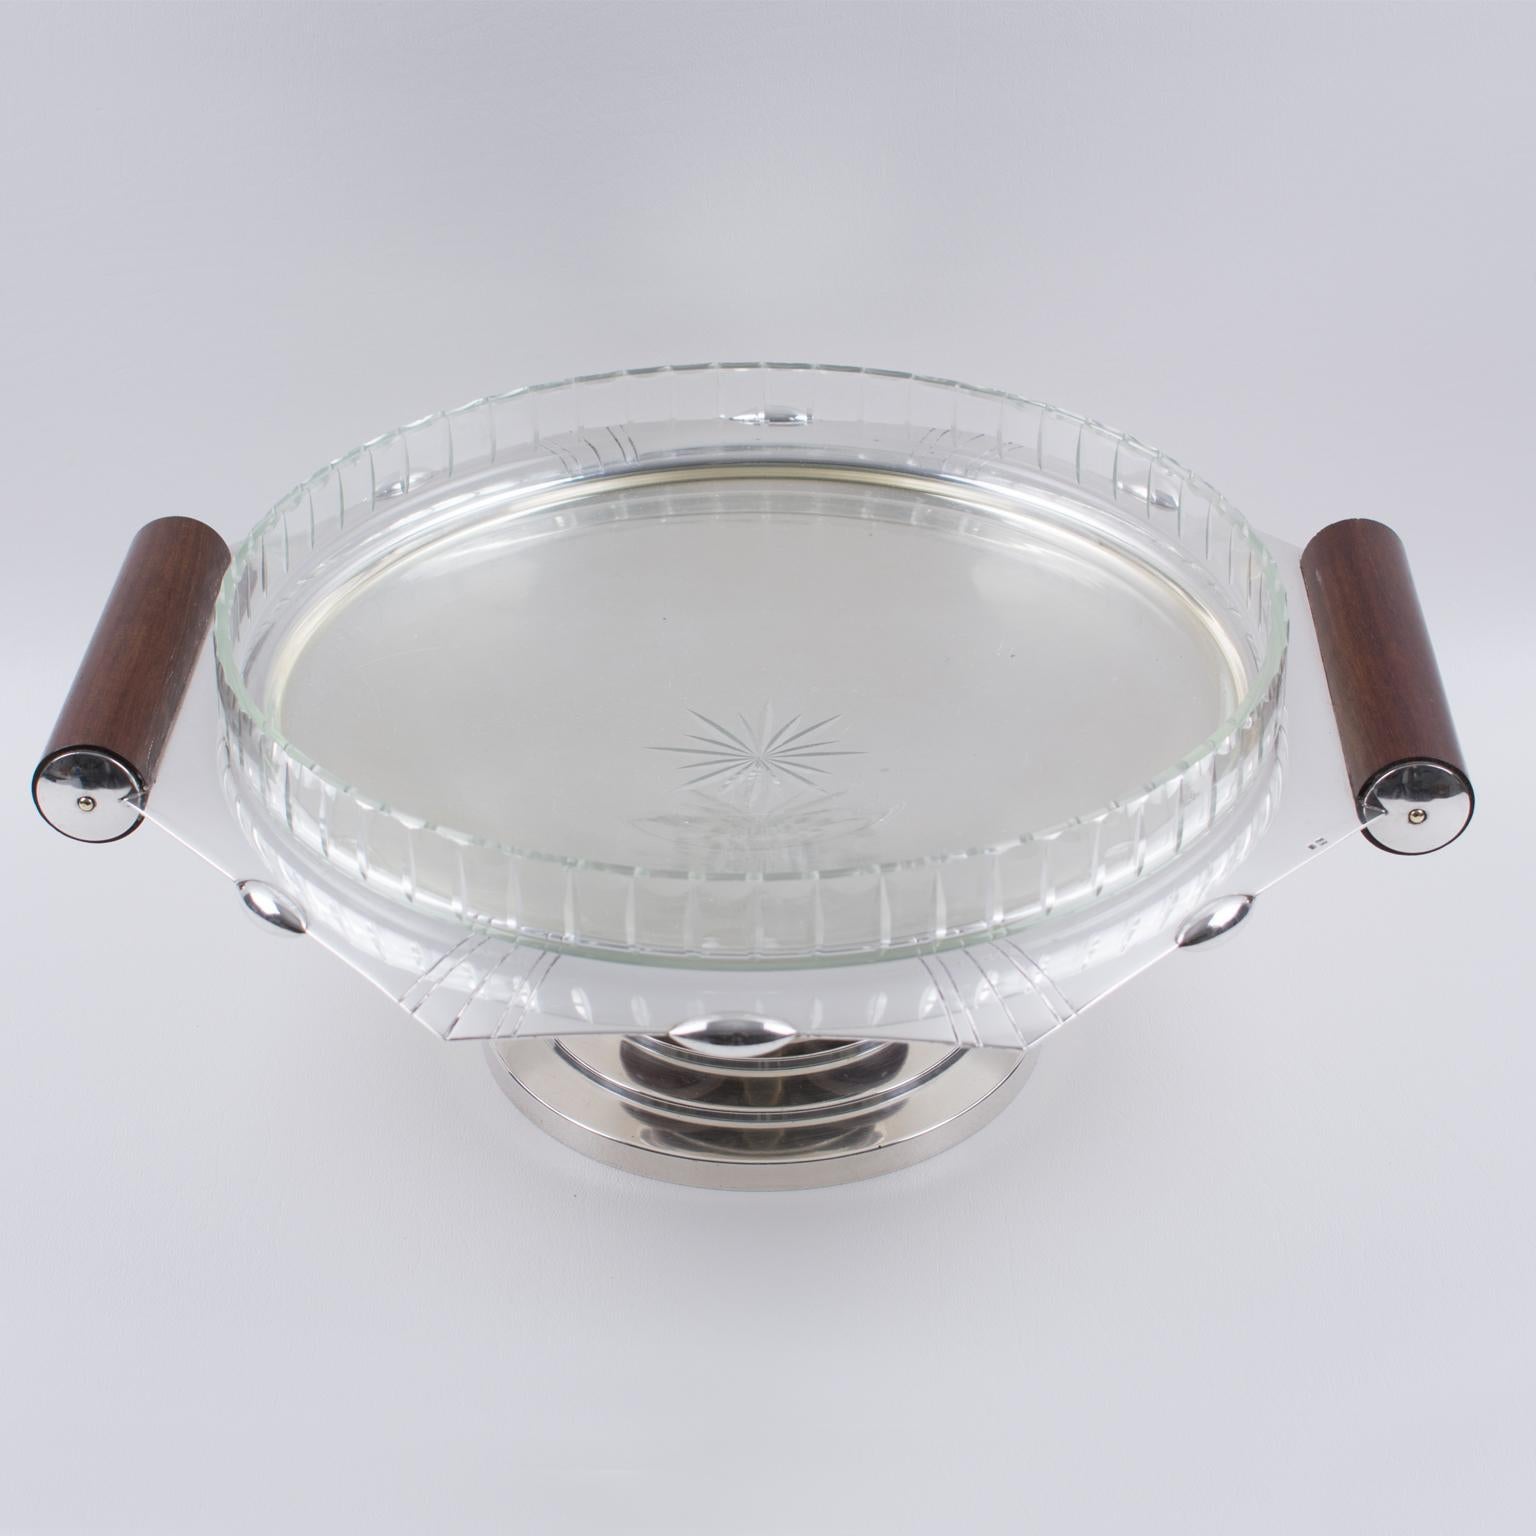 Wood Art Deco Roux & Marquiand Silver Plate Crystal Large Serving Bowl Centerpiece